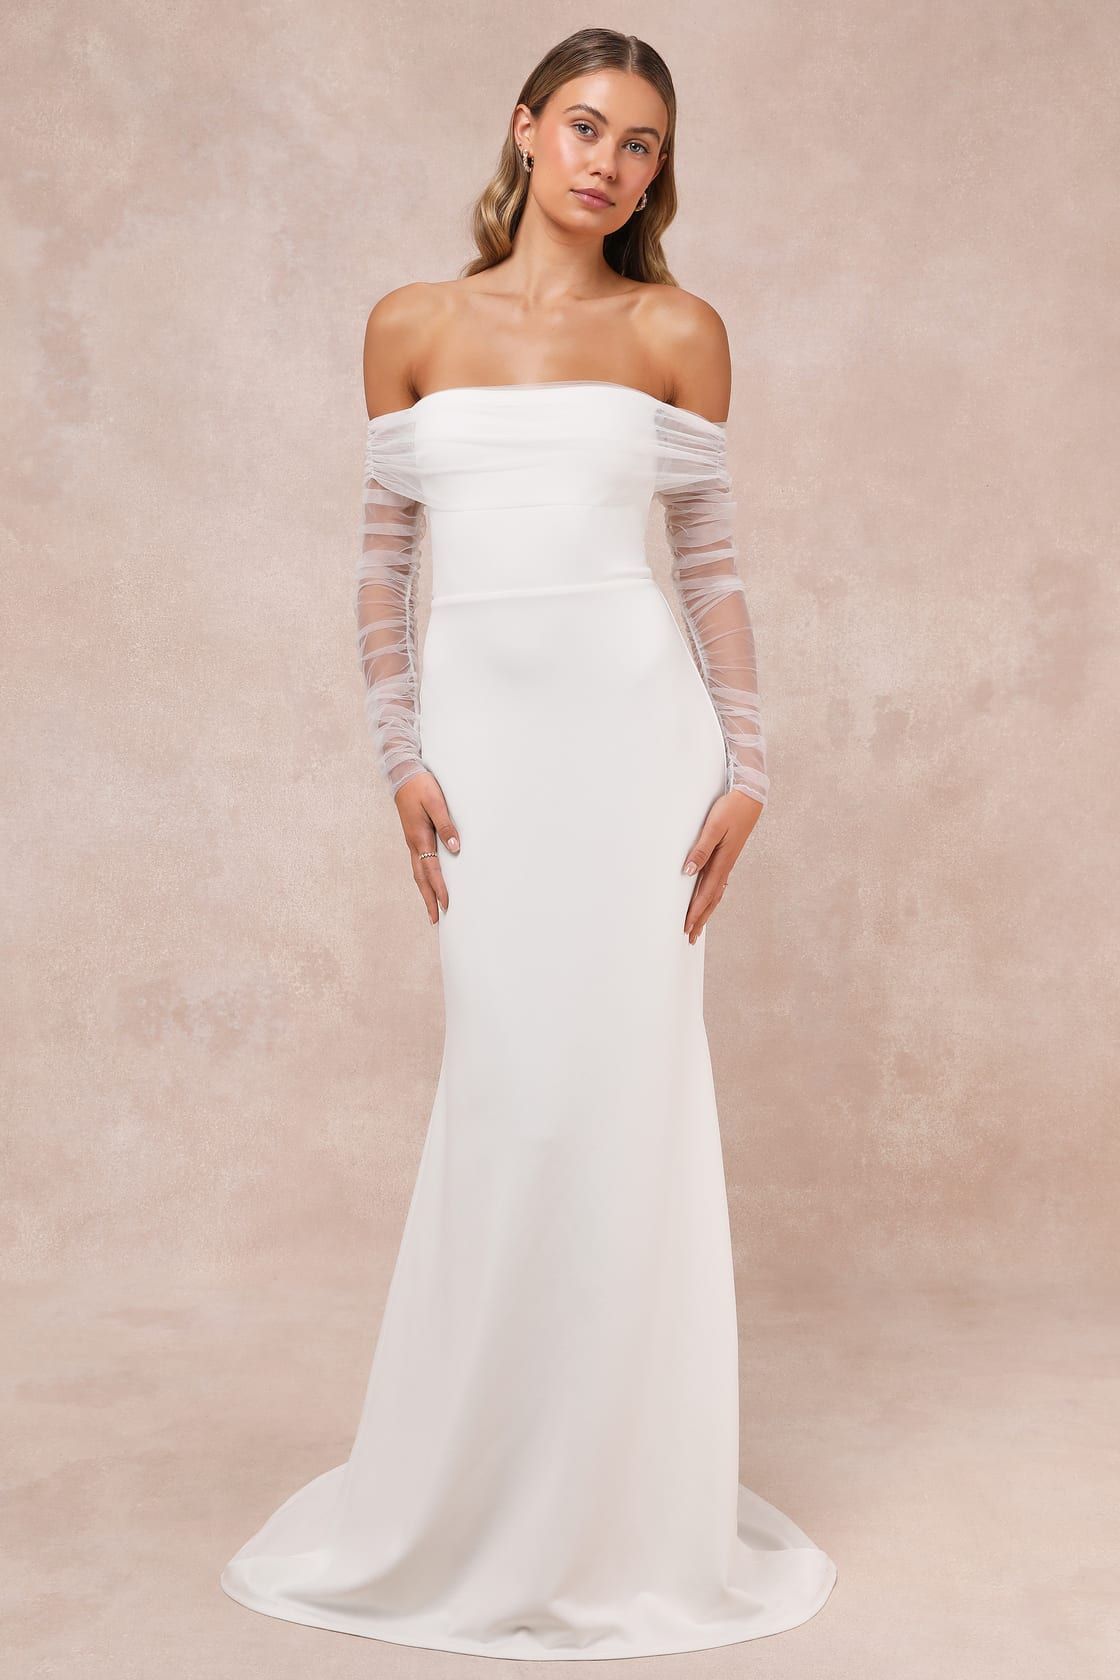 Beautifully Beloved White Mesh Off-the-Shoulder Maxi Dress | Lulus